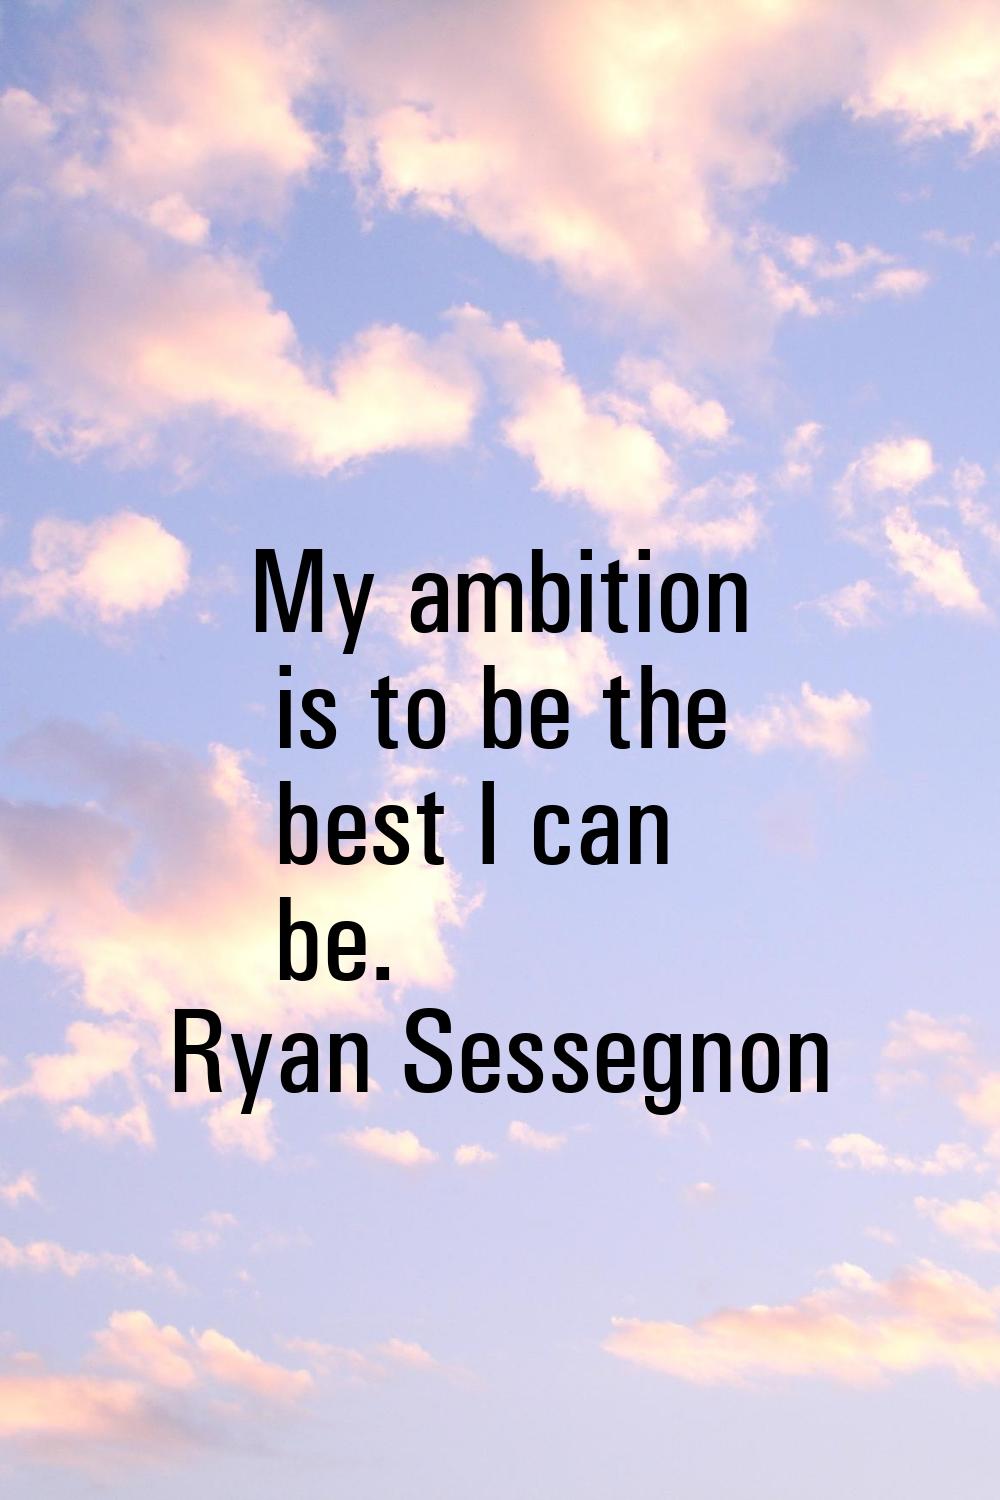 My ambition is to be the best I can be.